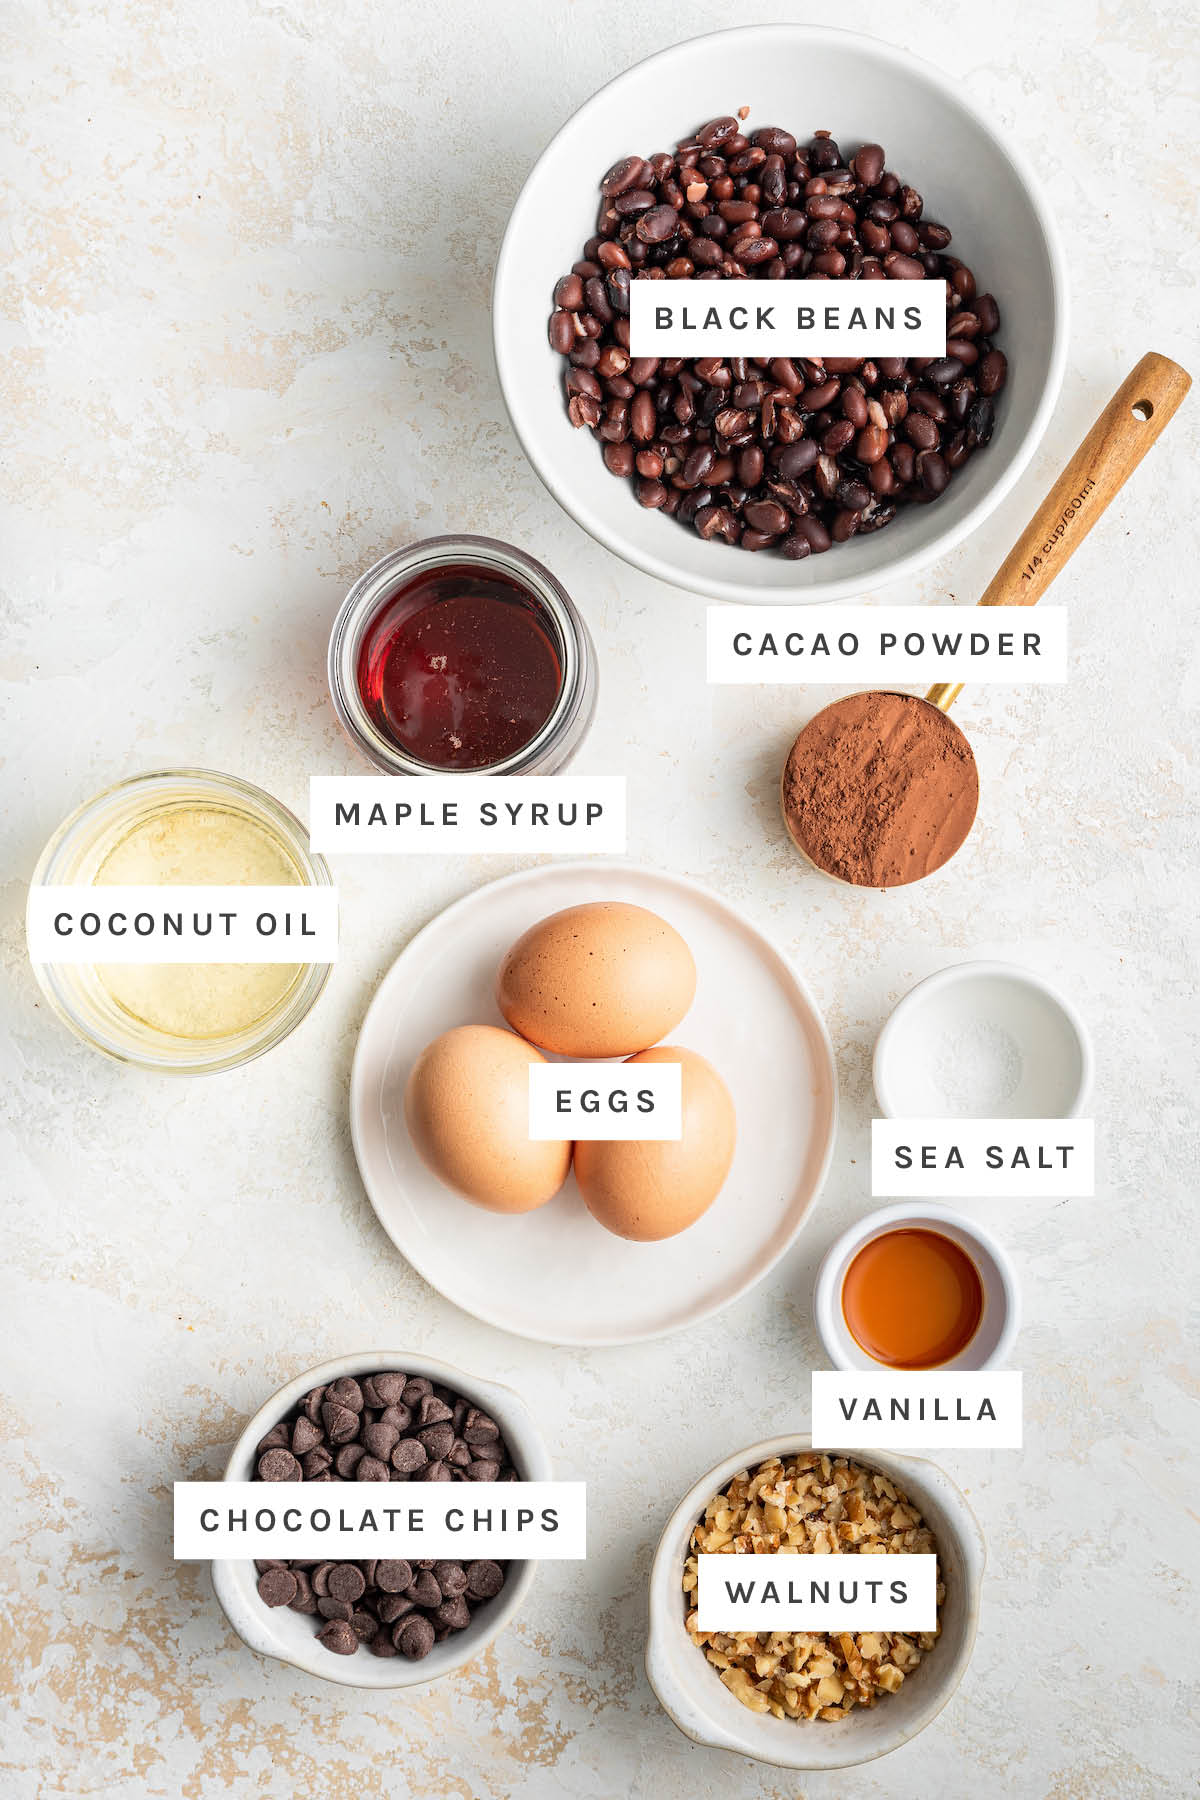 Ingredients measured to make fudgy black bean brownies: black beans, maple syrup, cacao powder, coconut oil, eggs, sea salt, vanilla, chocolate chips, walnuts.